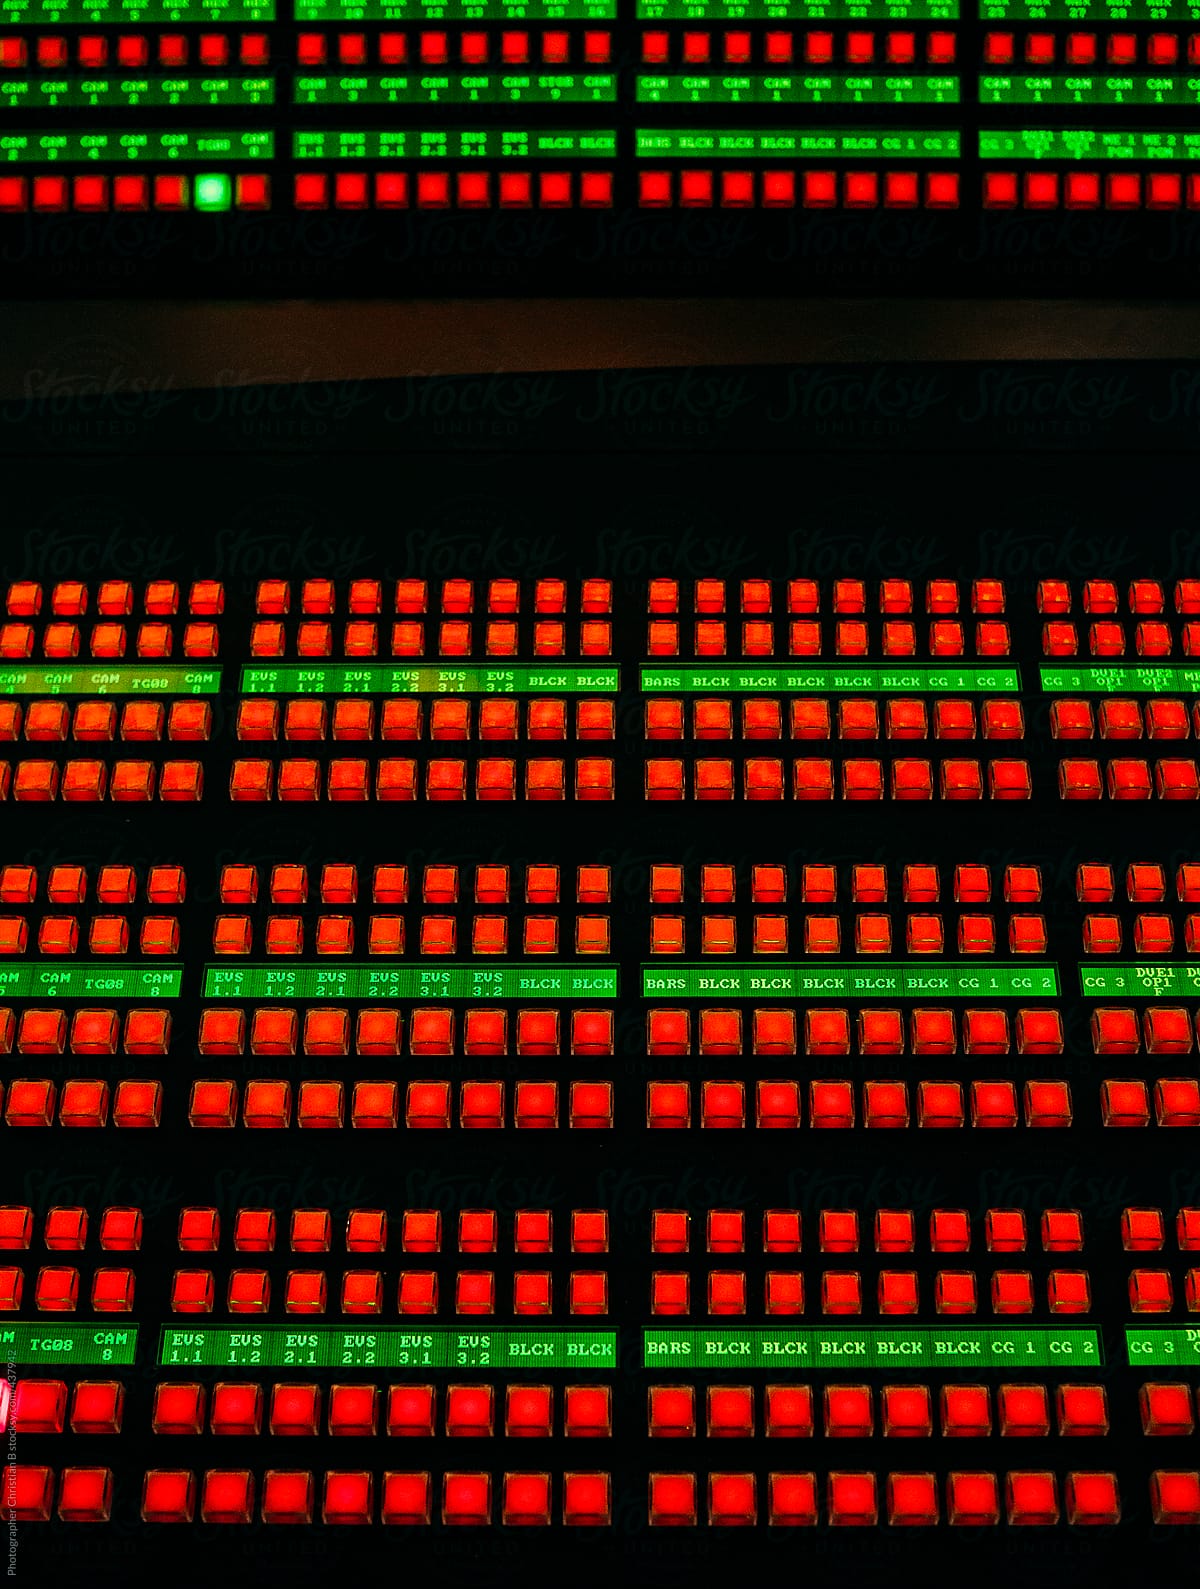 Red buttons and green displays